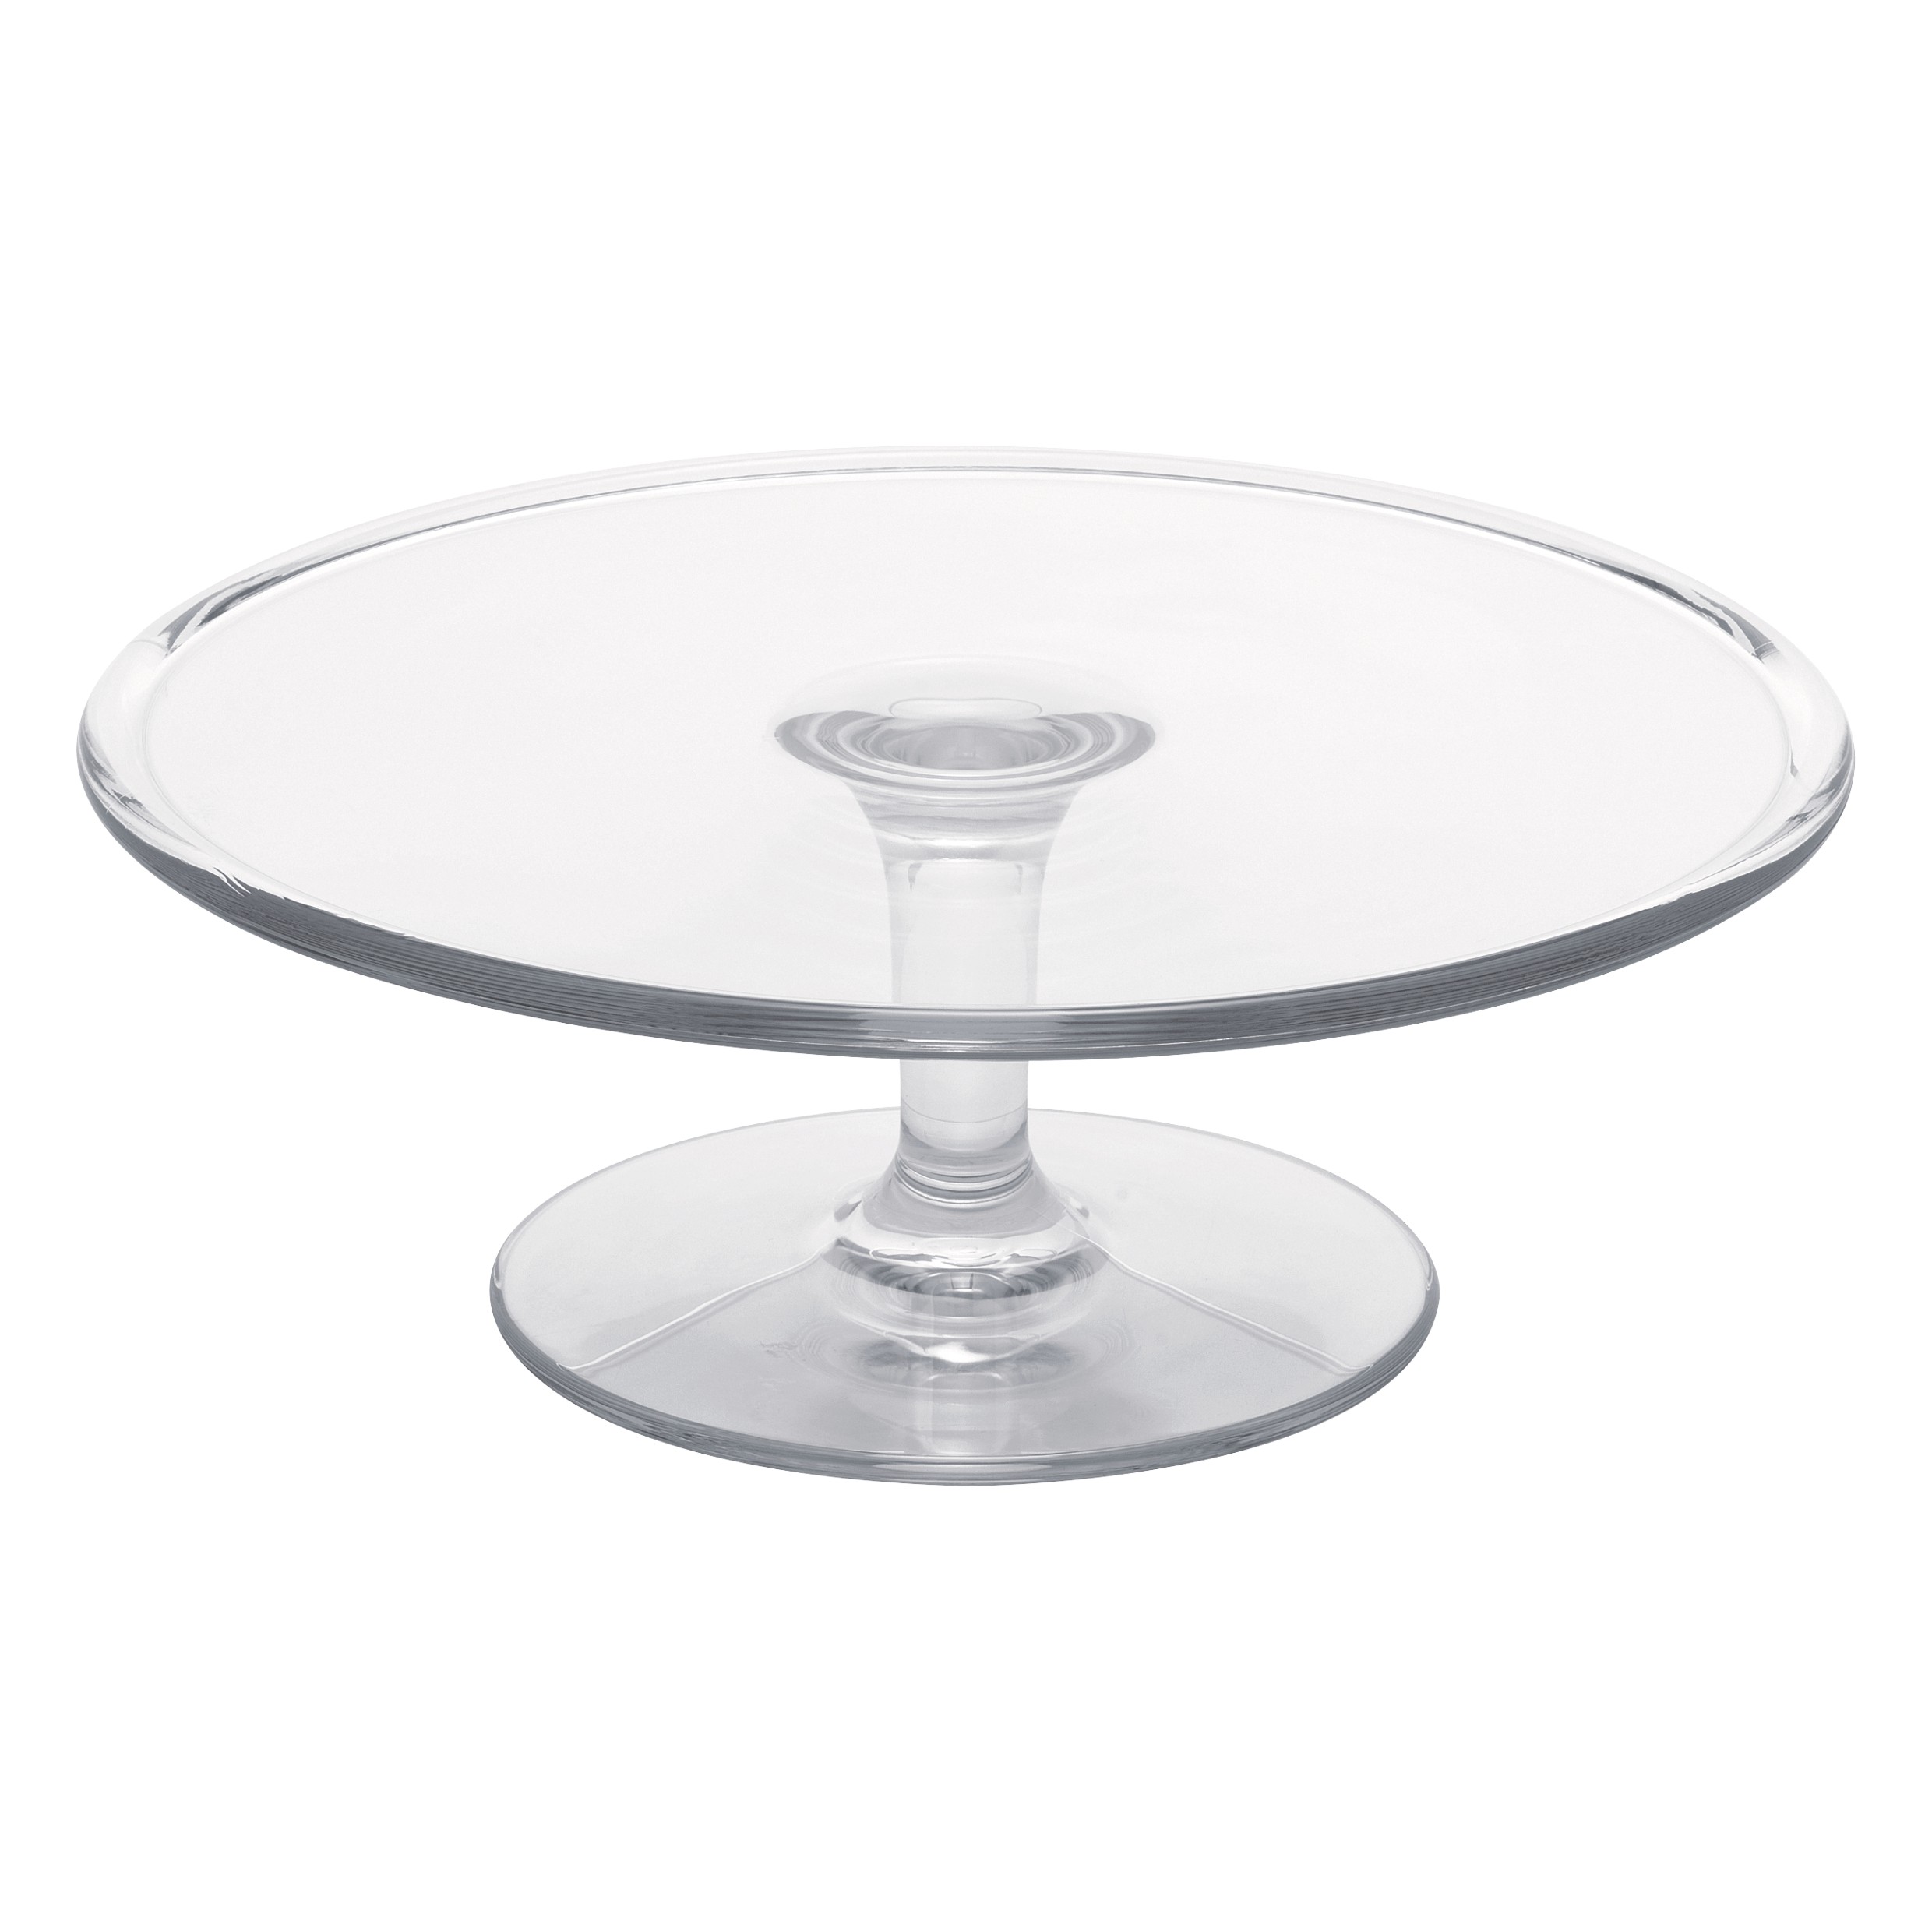 TC12 PC STAND CLEAR ROUND POLYCARBONATE 34.2X13CM